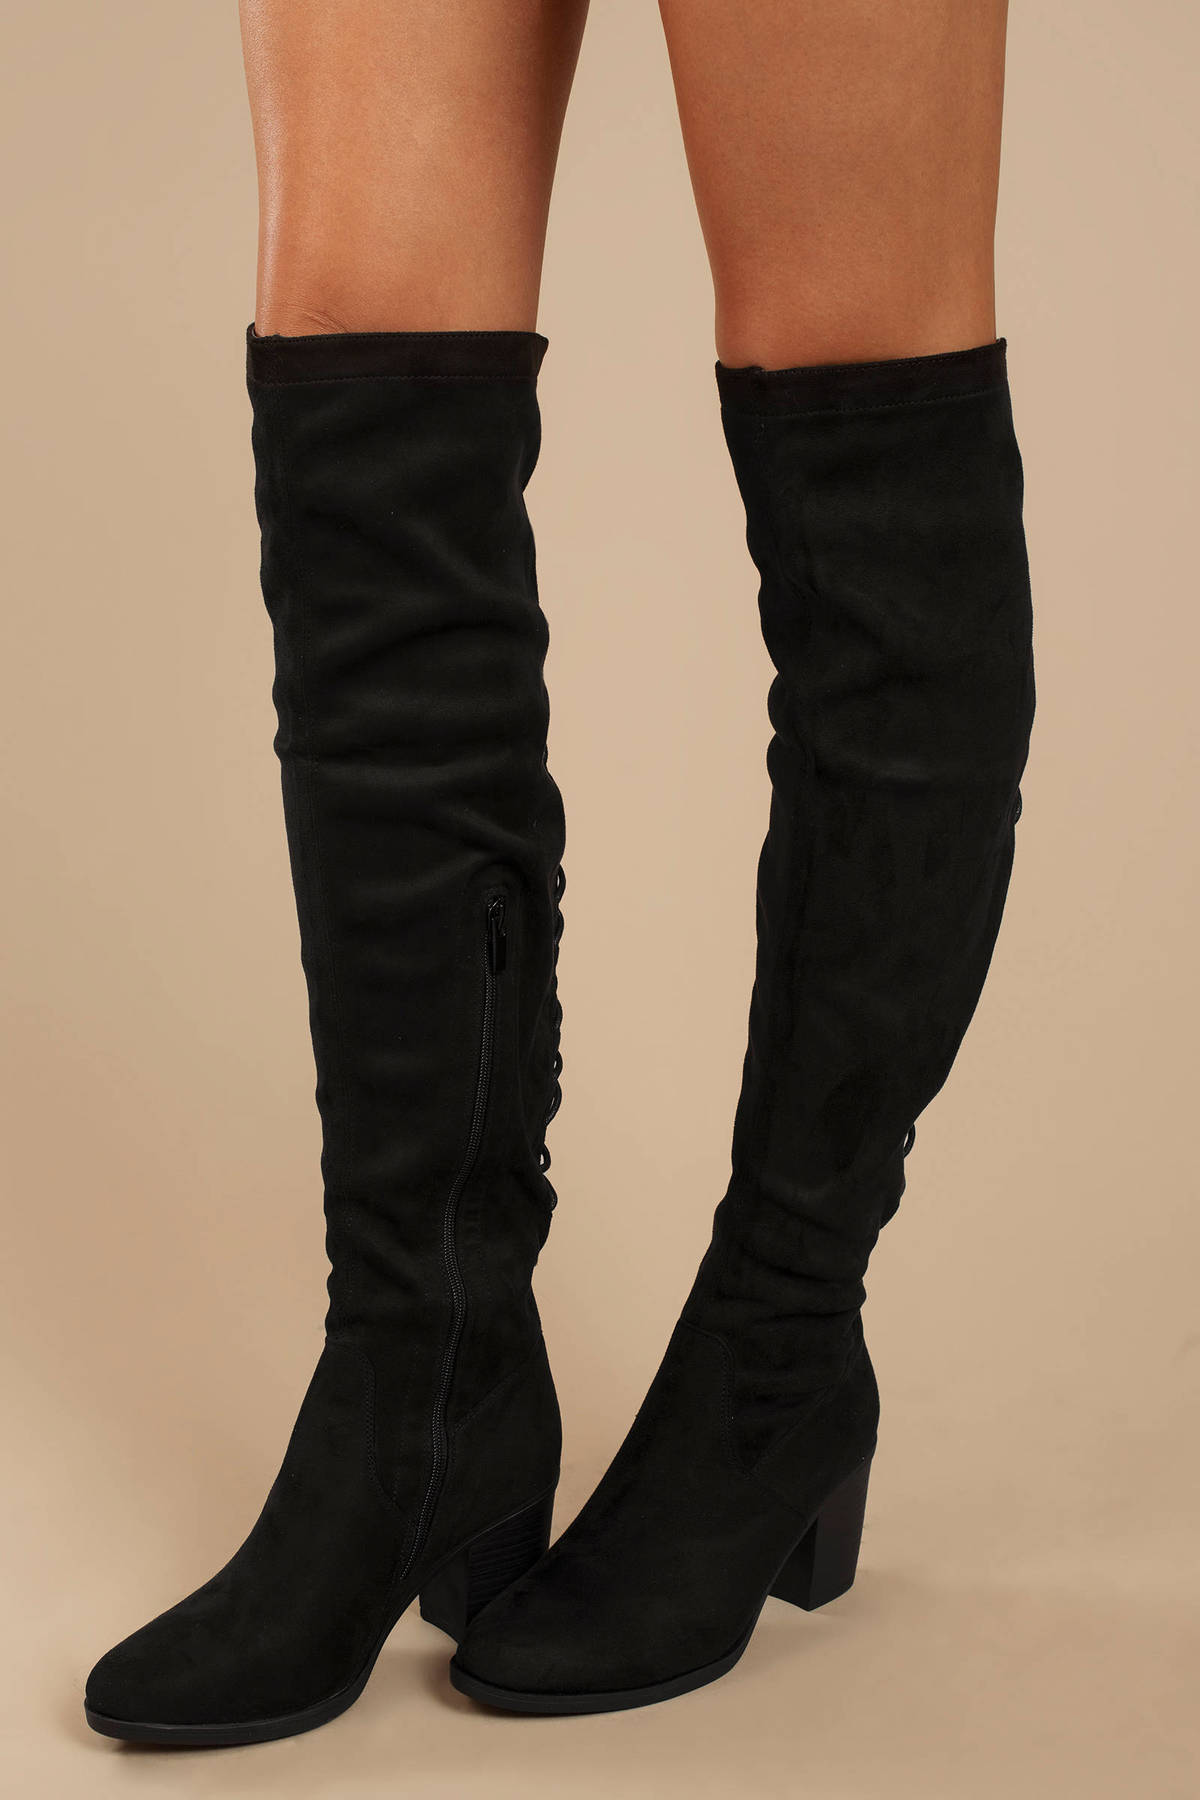 Molly Knee High Boots in Black - $88 | Tobi US